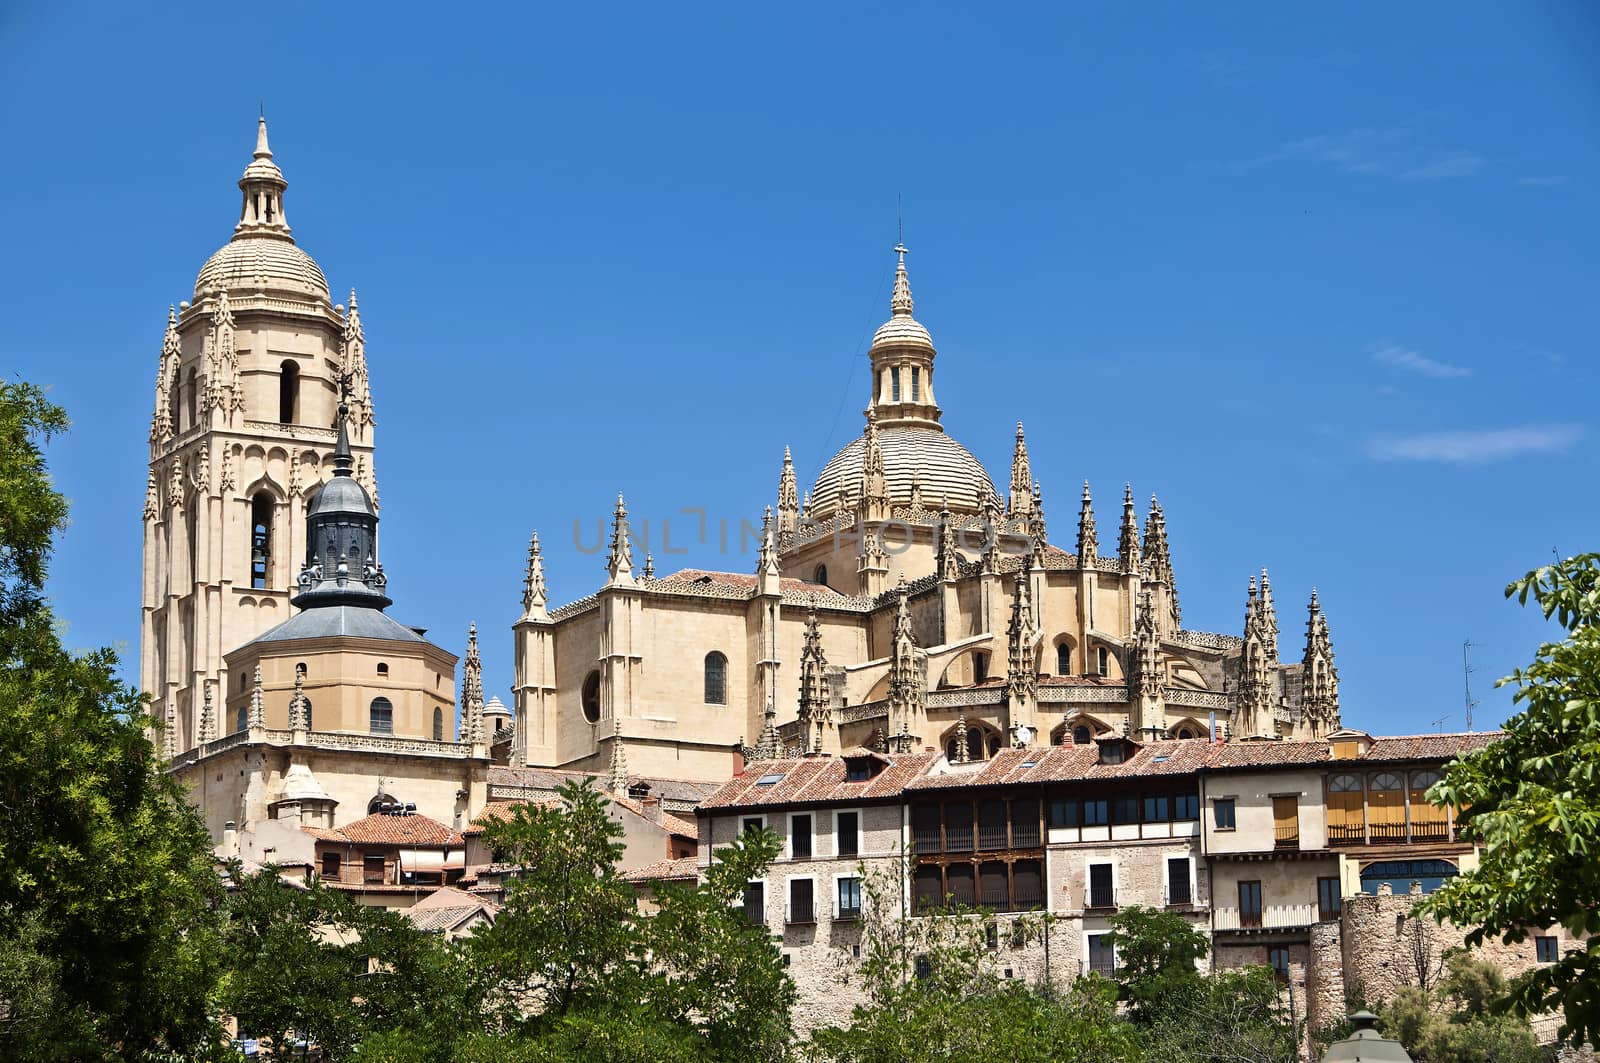 Santa Maria Cathedral of Segovia declared of cultural interest in 1931